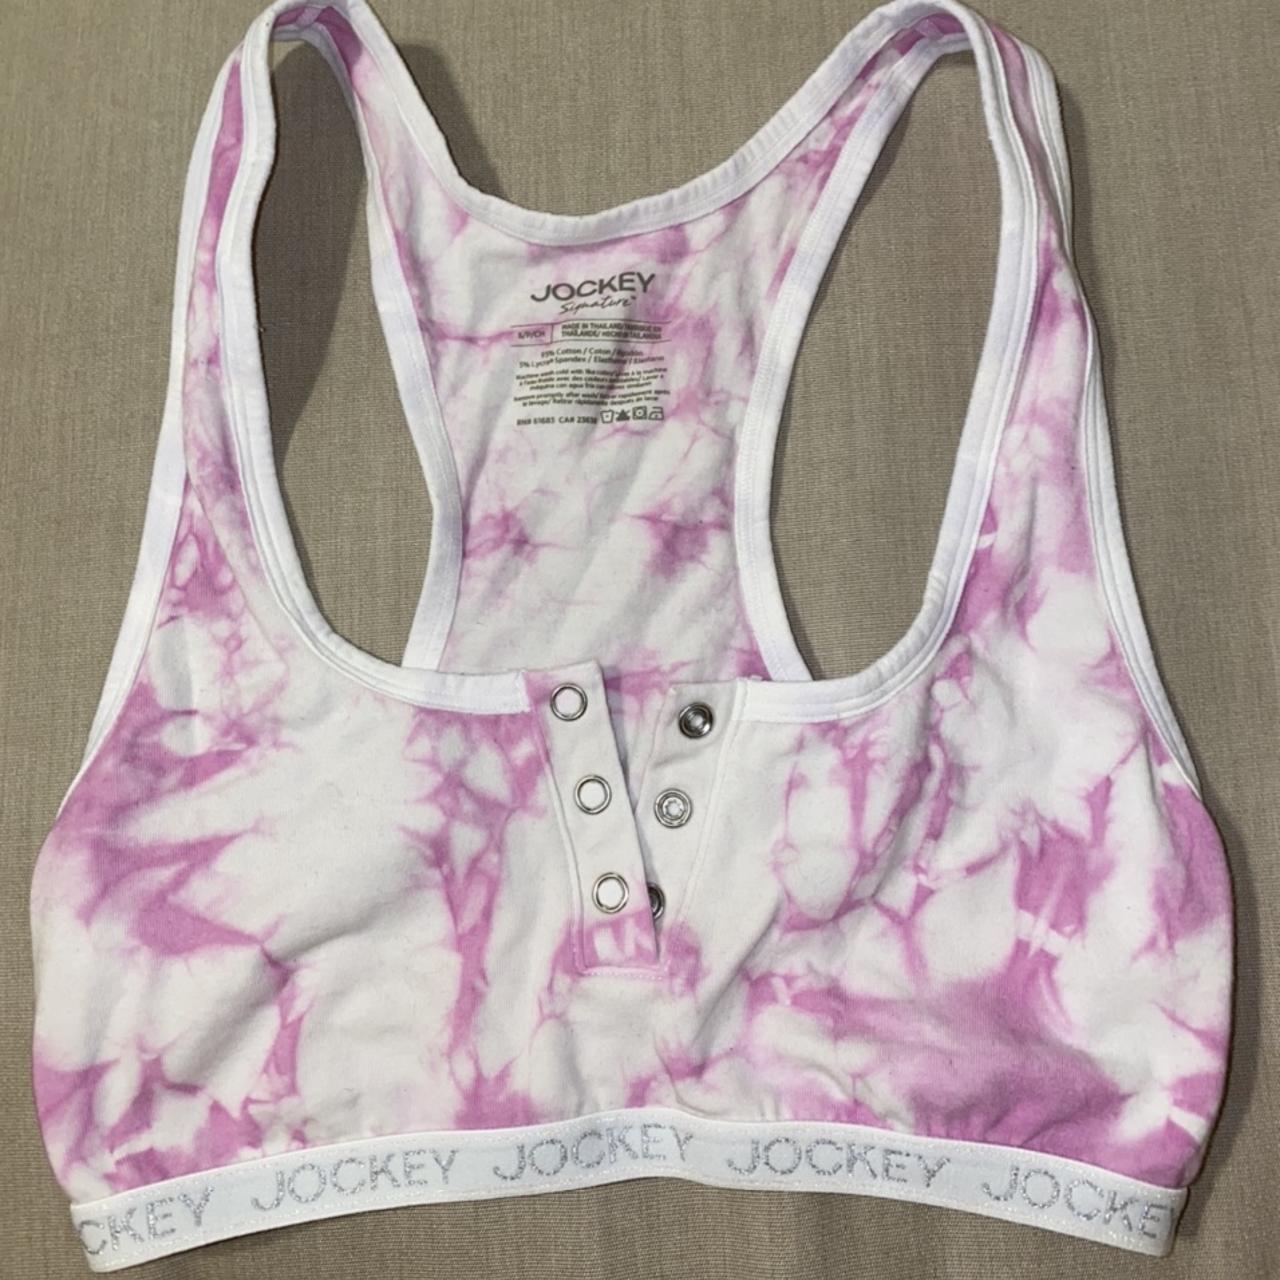 JOCKEY signature bra!! 💕Can be worn working out, - Depop